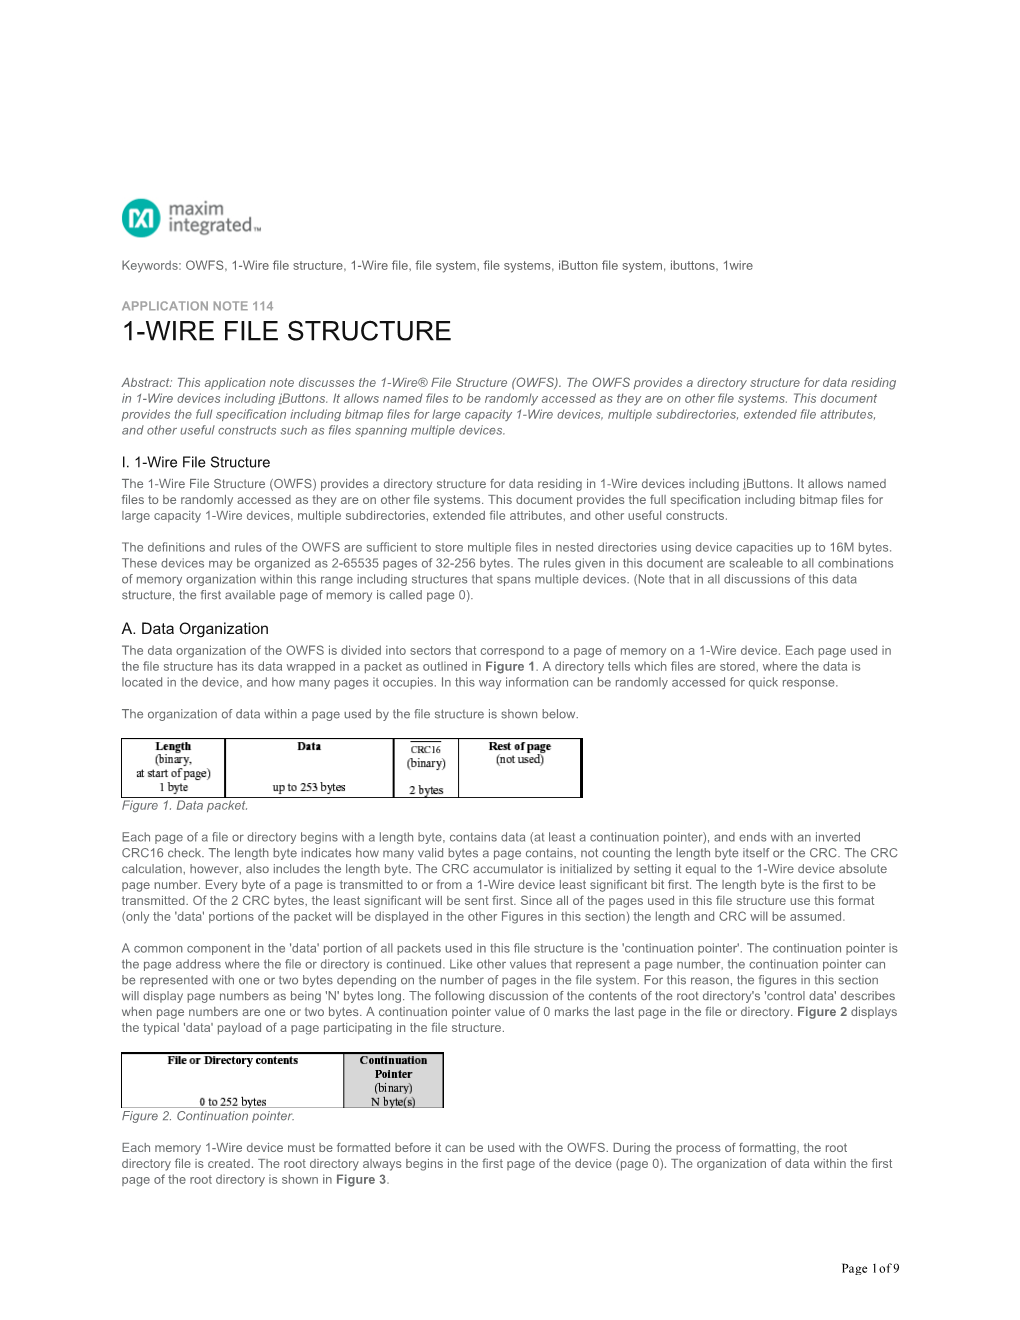 Application Note 114: 1-Wire File Structure